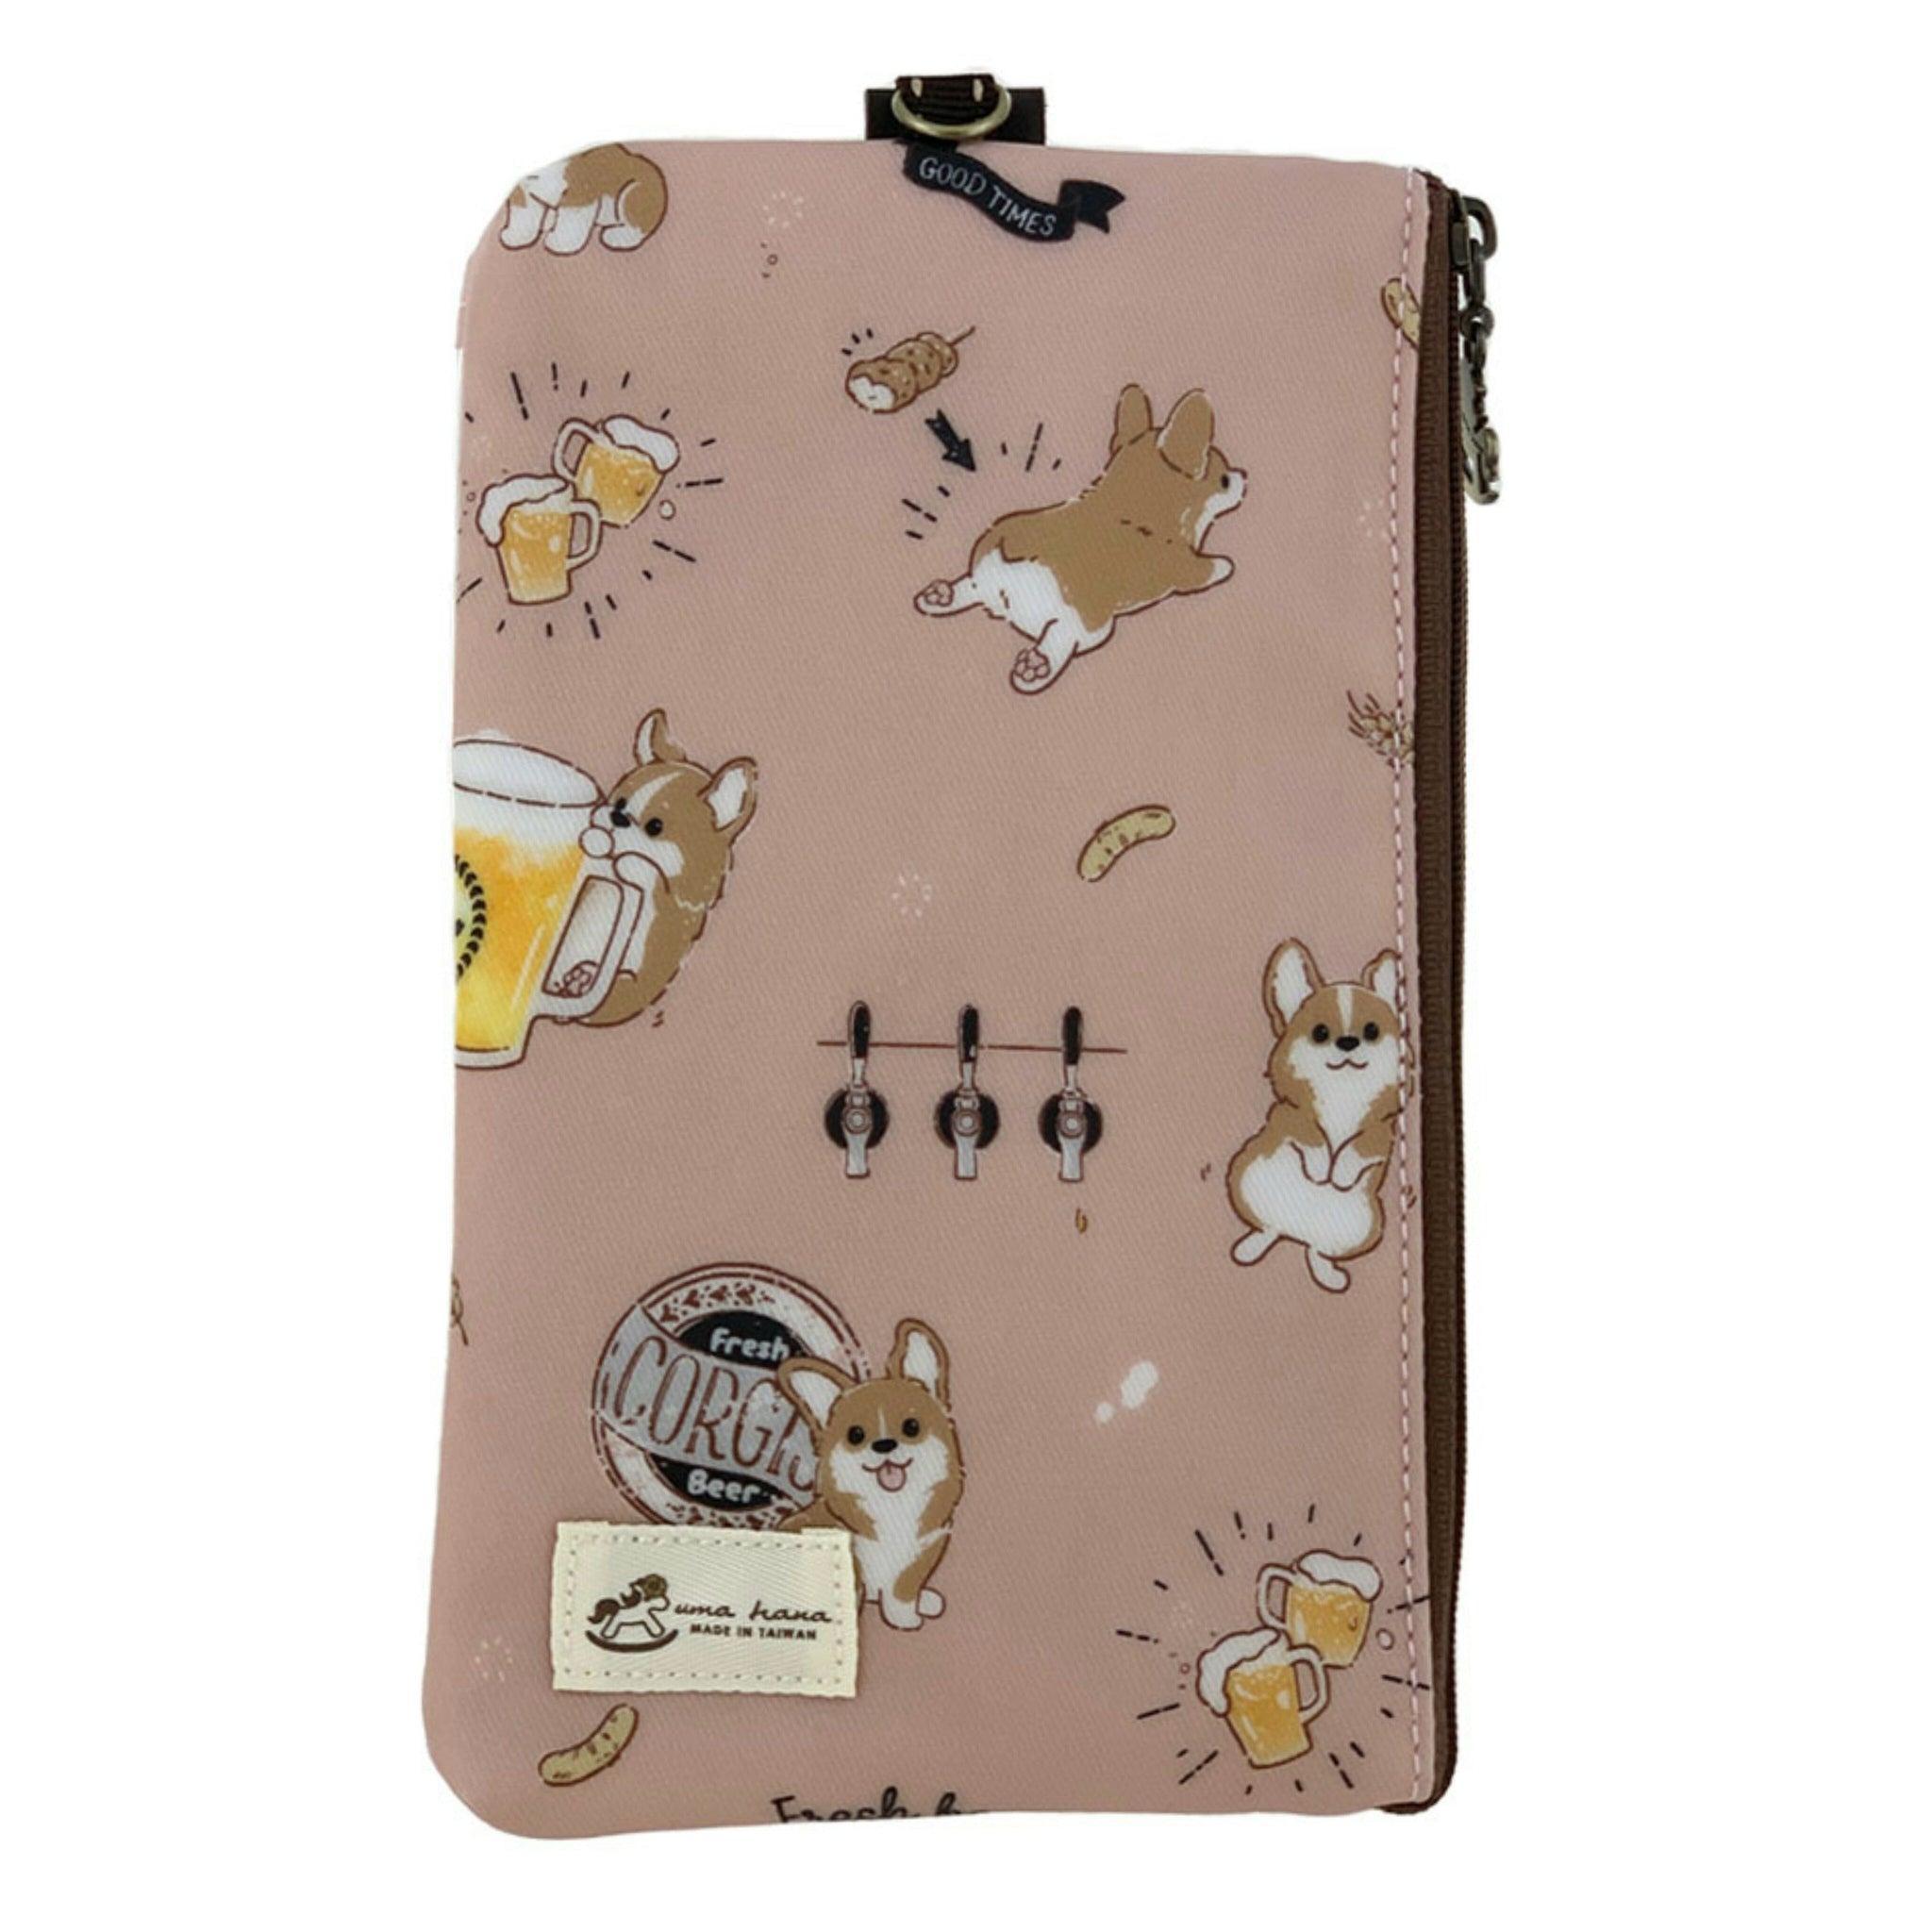 Pink Beer Corgi Phone Pouch